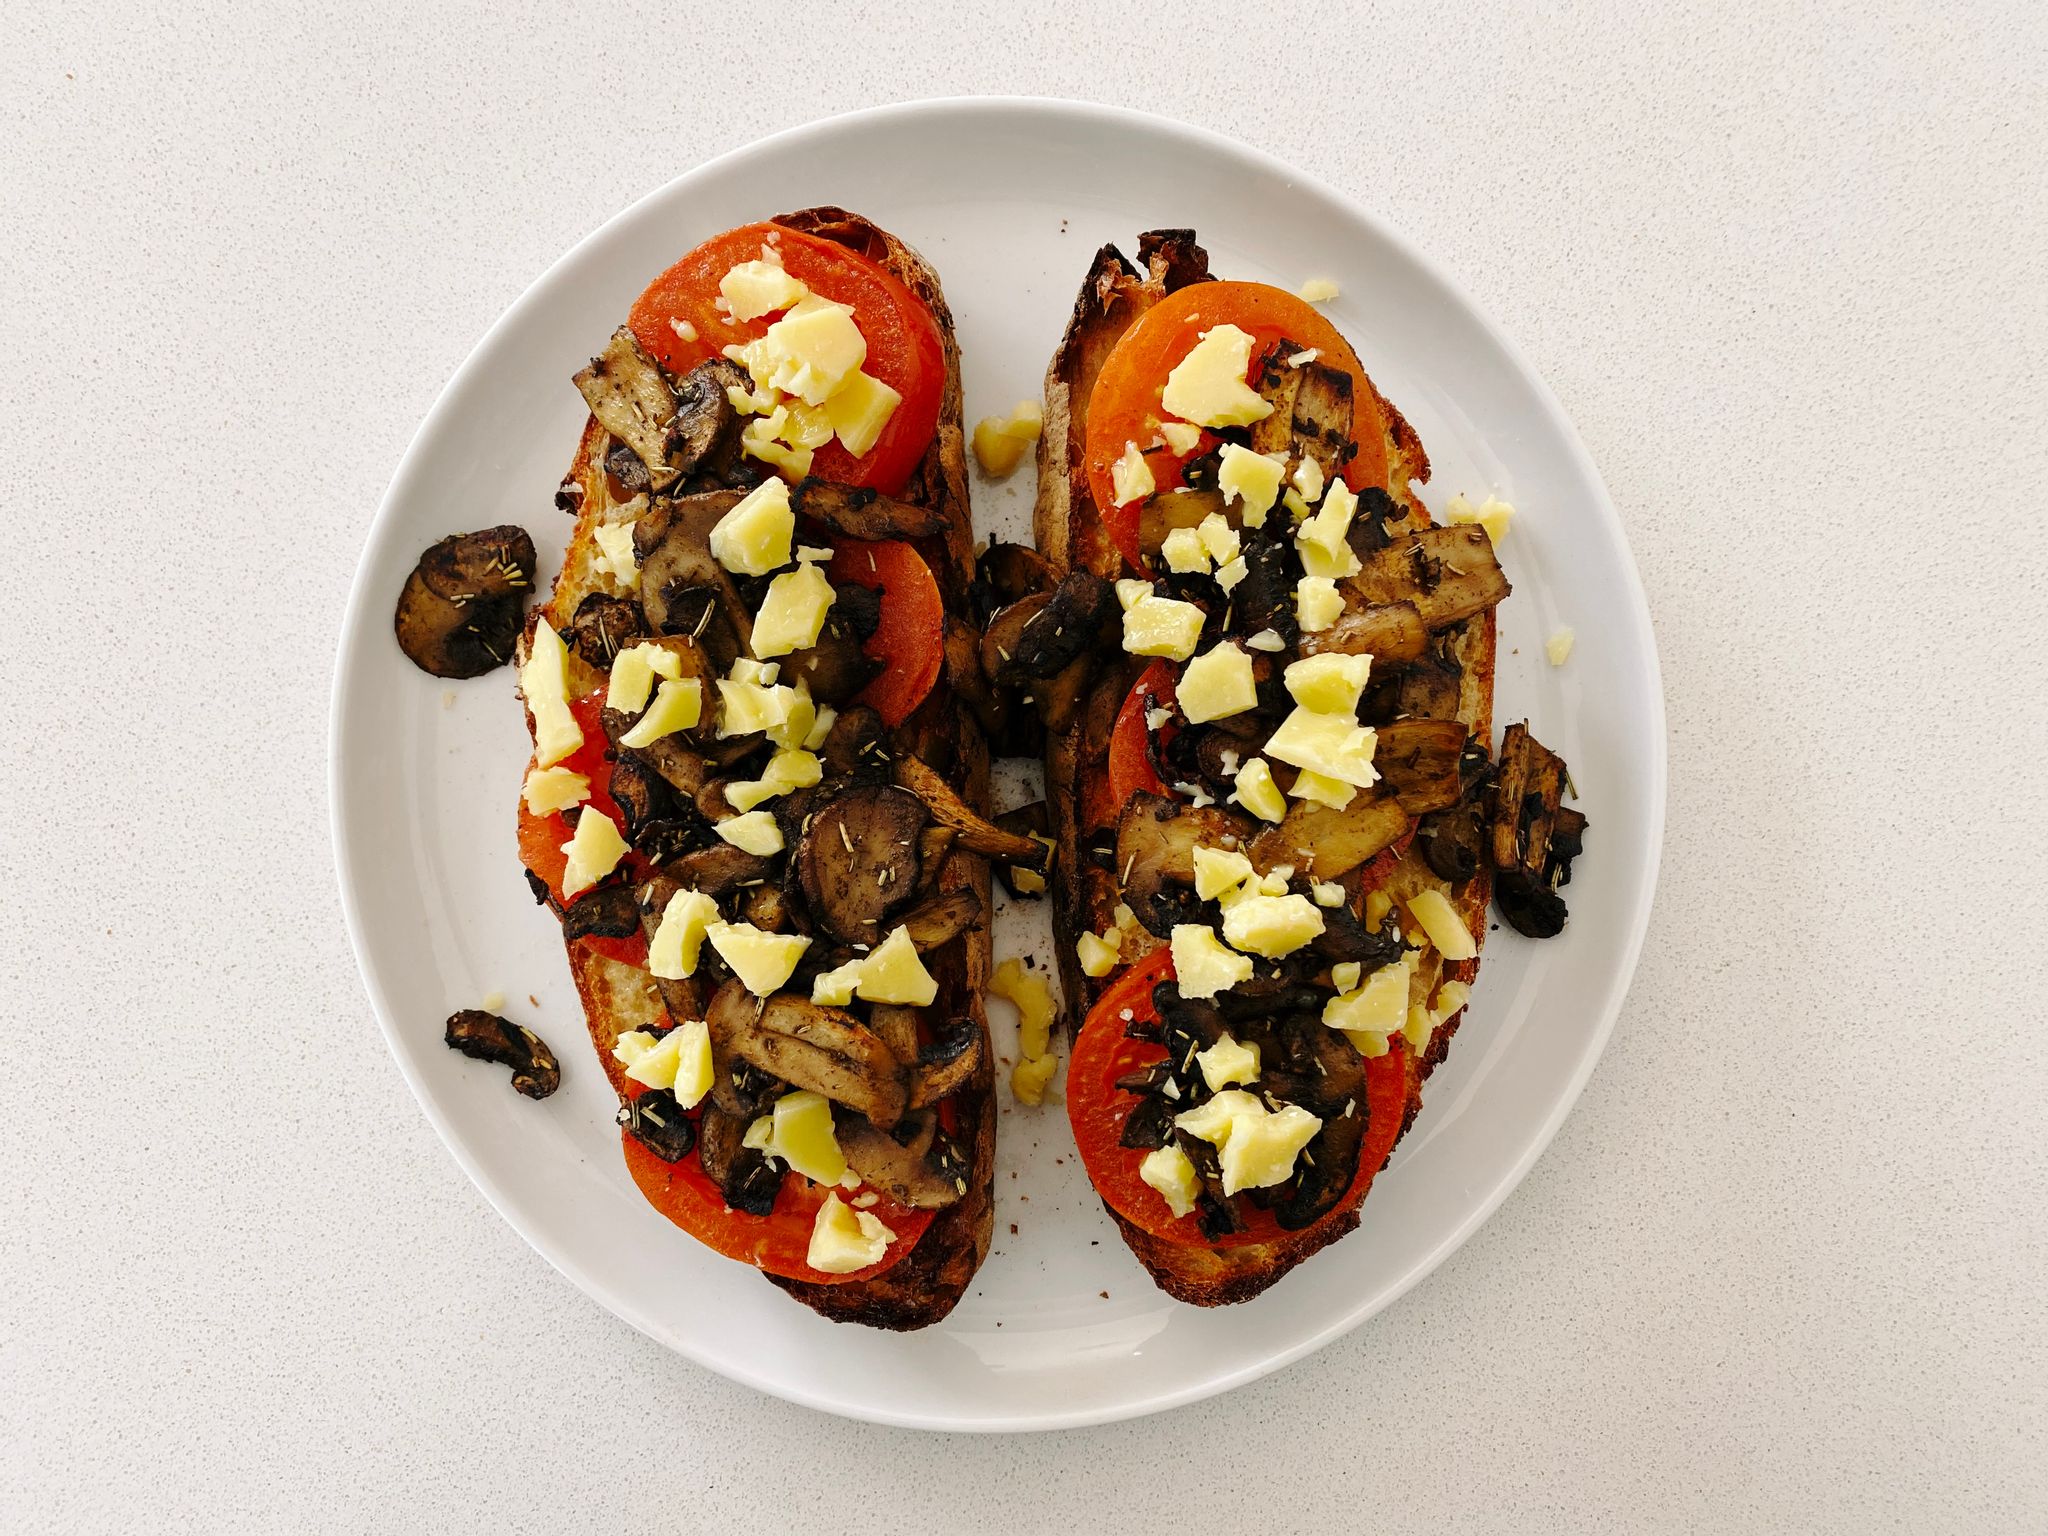 A photo of two slices of homemade bread sitting on a plate, topped with thick slices of tomato with mushrooms on them, and small pieces of crumbled up cheddar cheese atop it all.